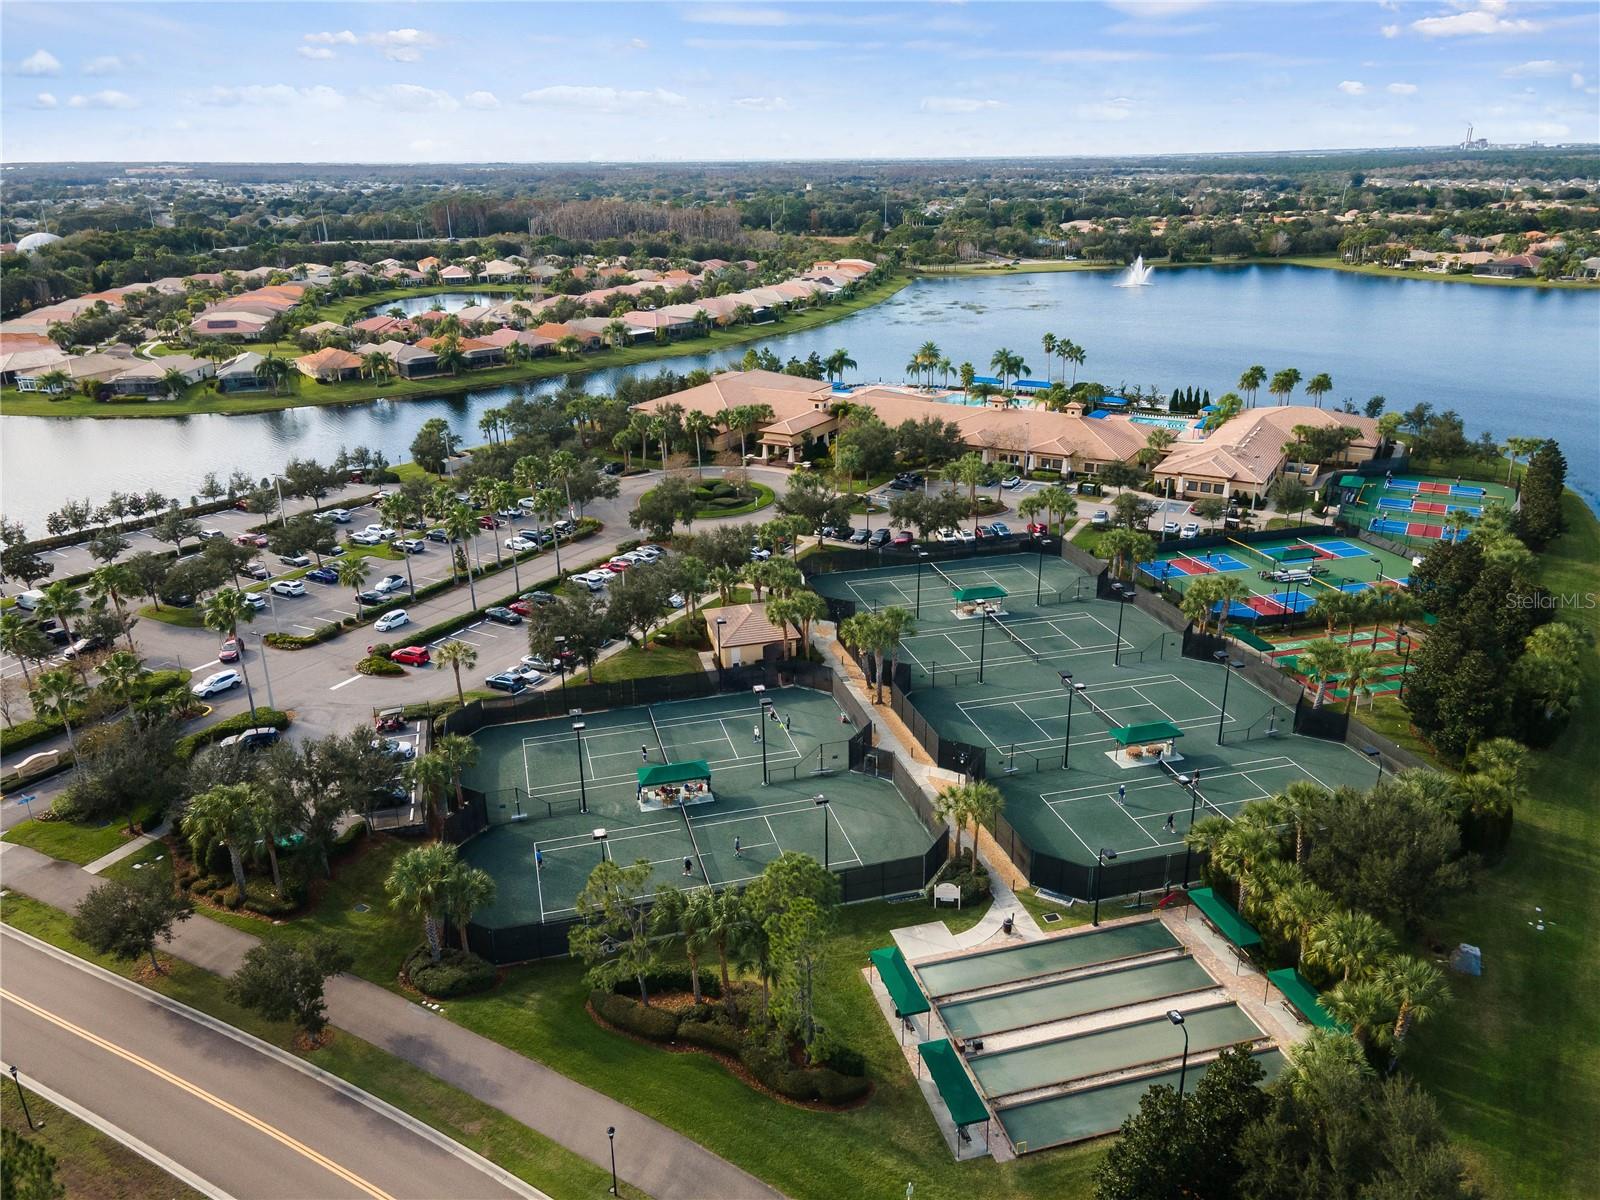 Aerial view of clubhouse & various courts